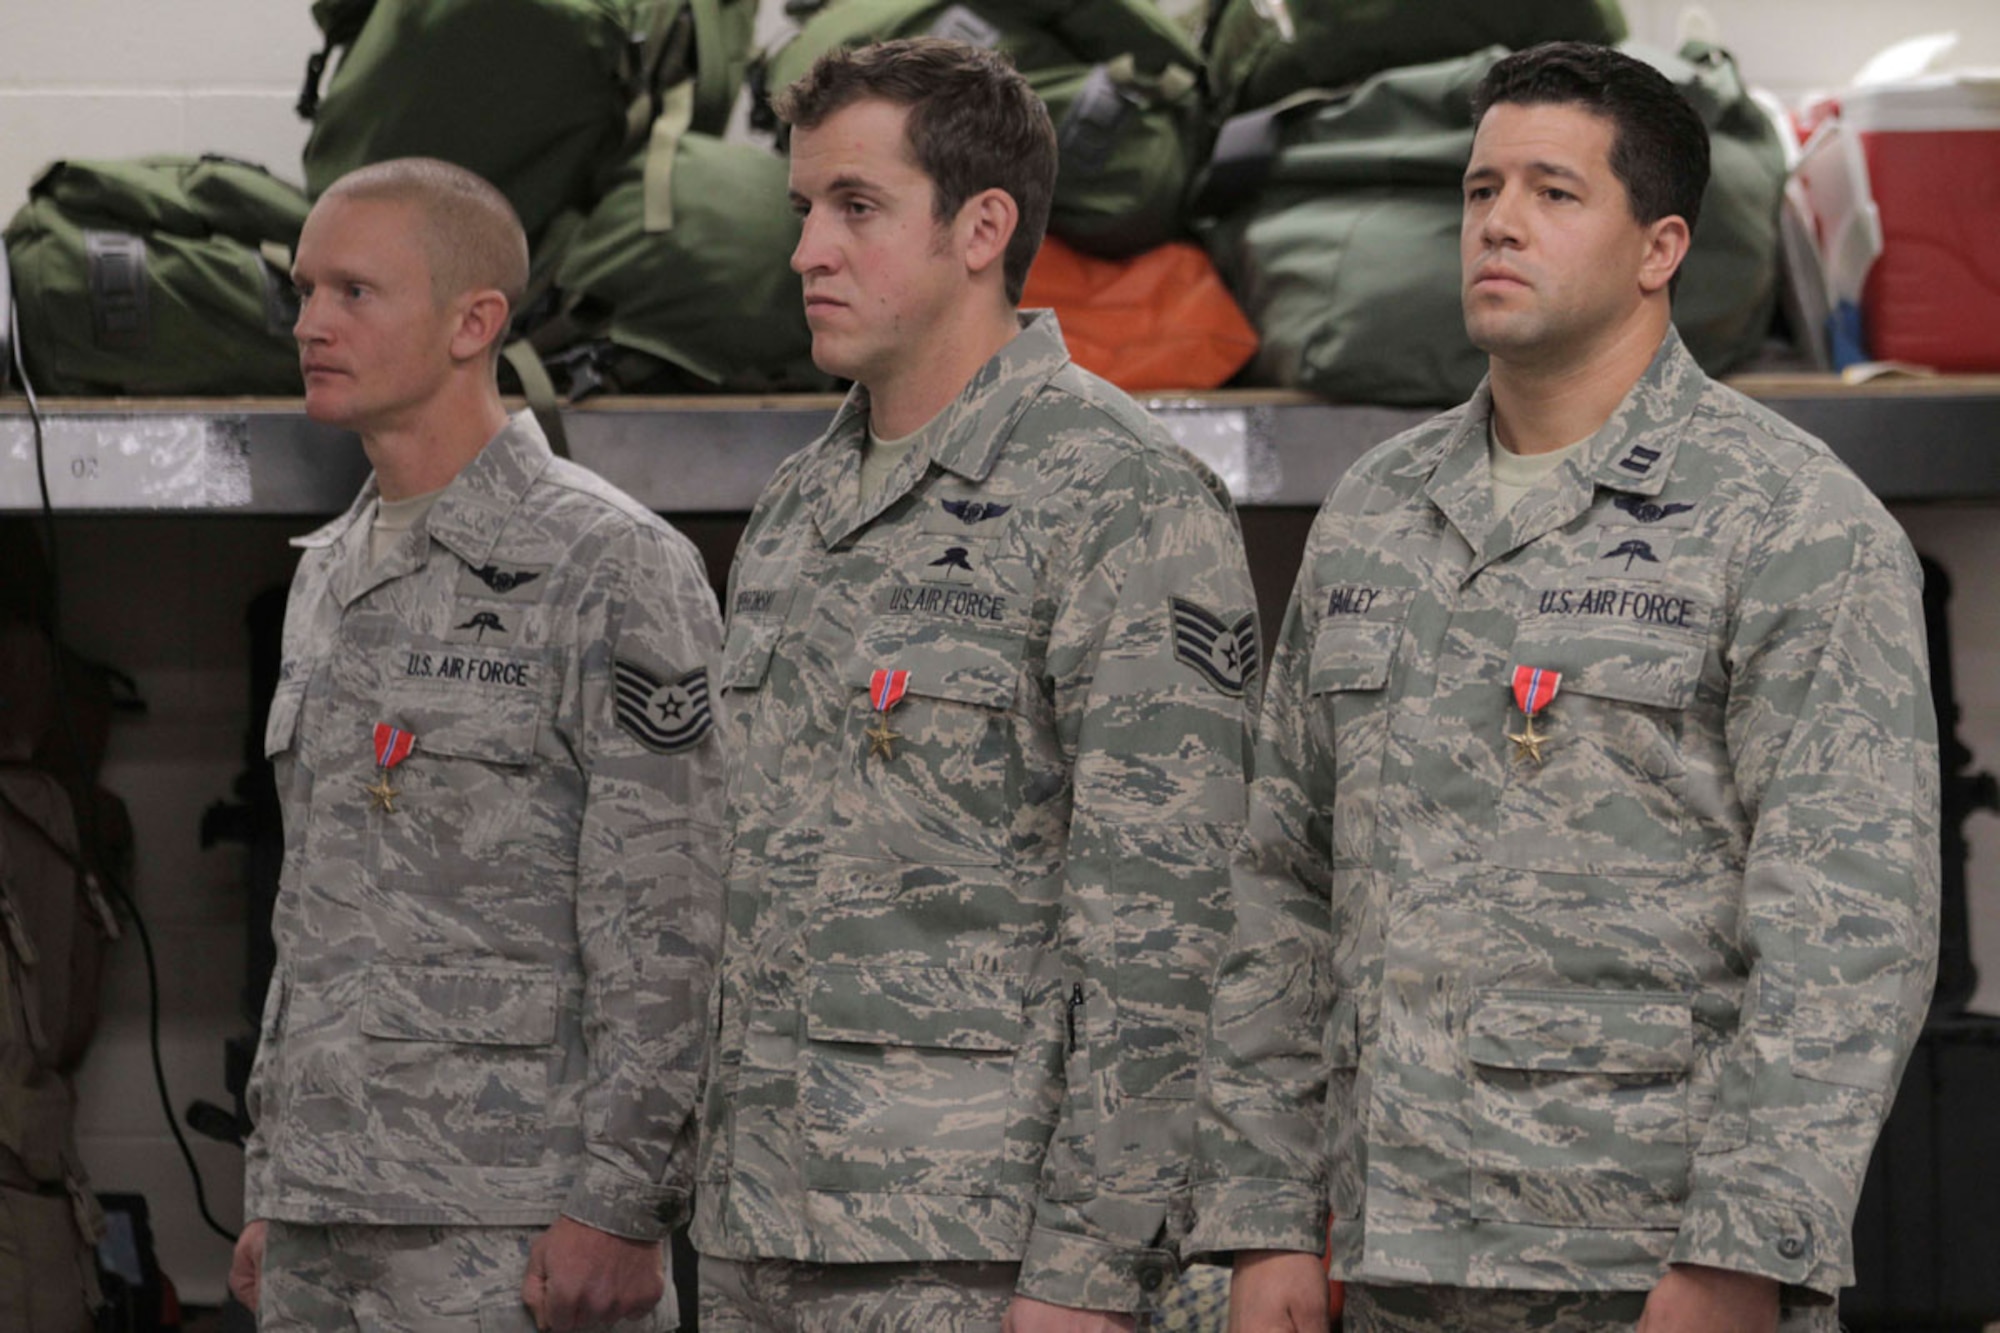 Tech. Sgt. Shane J. Hargis, Air Force Staff Sgt. Theodore M. Sierocinski and Capt. Koaalii C. Bailey stand during a Oct. 13 ceremony after they received the Bronze Star Medal with Valor device. (Alaska National Guard photo/Air Force Maj. Guy Hayes)